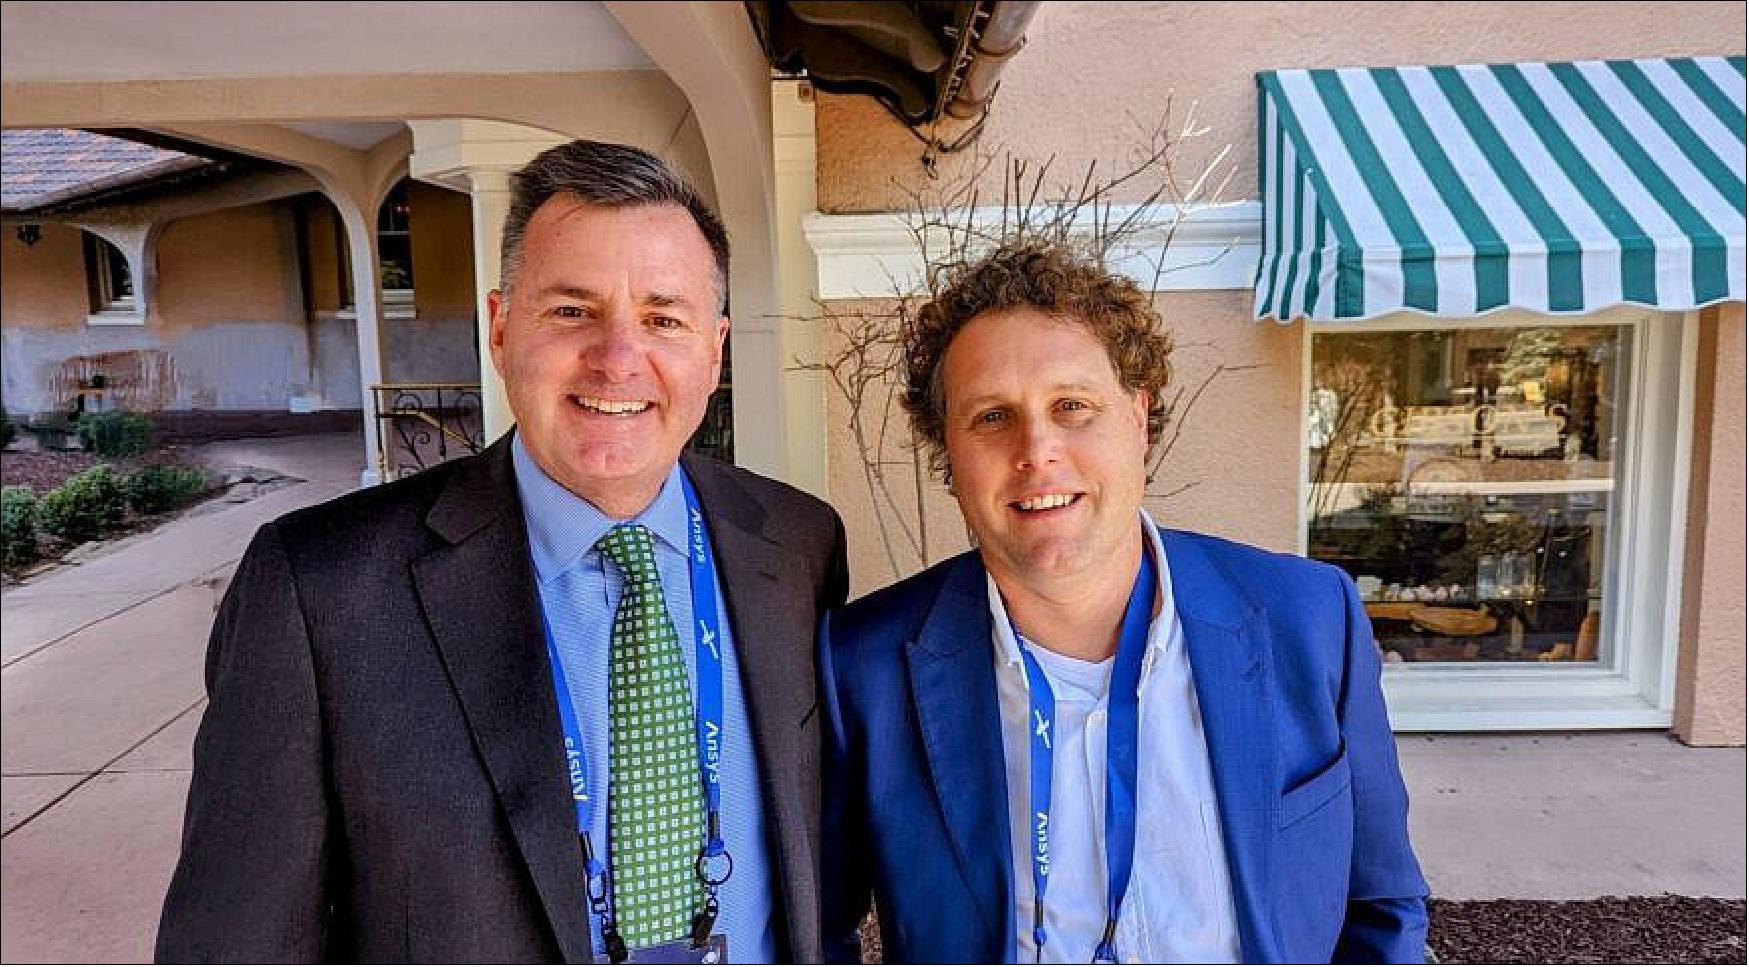 Figure 3: Brian O’Toole, CEO of BlackSky (left) and Peter Beck, CEO of Rocket Lab (right) meet April 4 at the 37th Space Symposium in Colorado Springs (image credit: BlackSky)